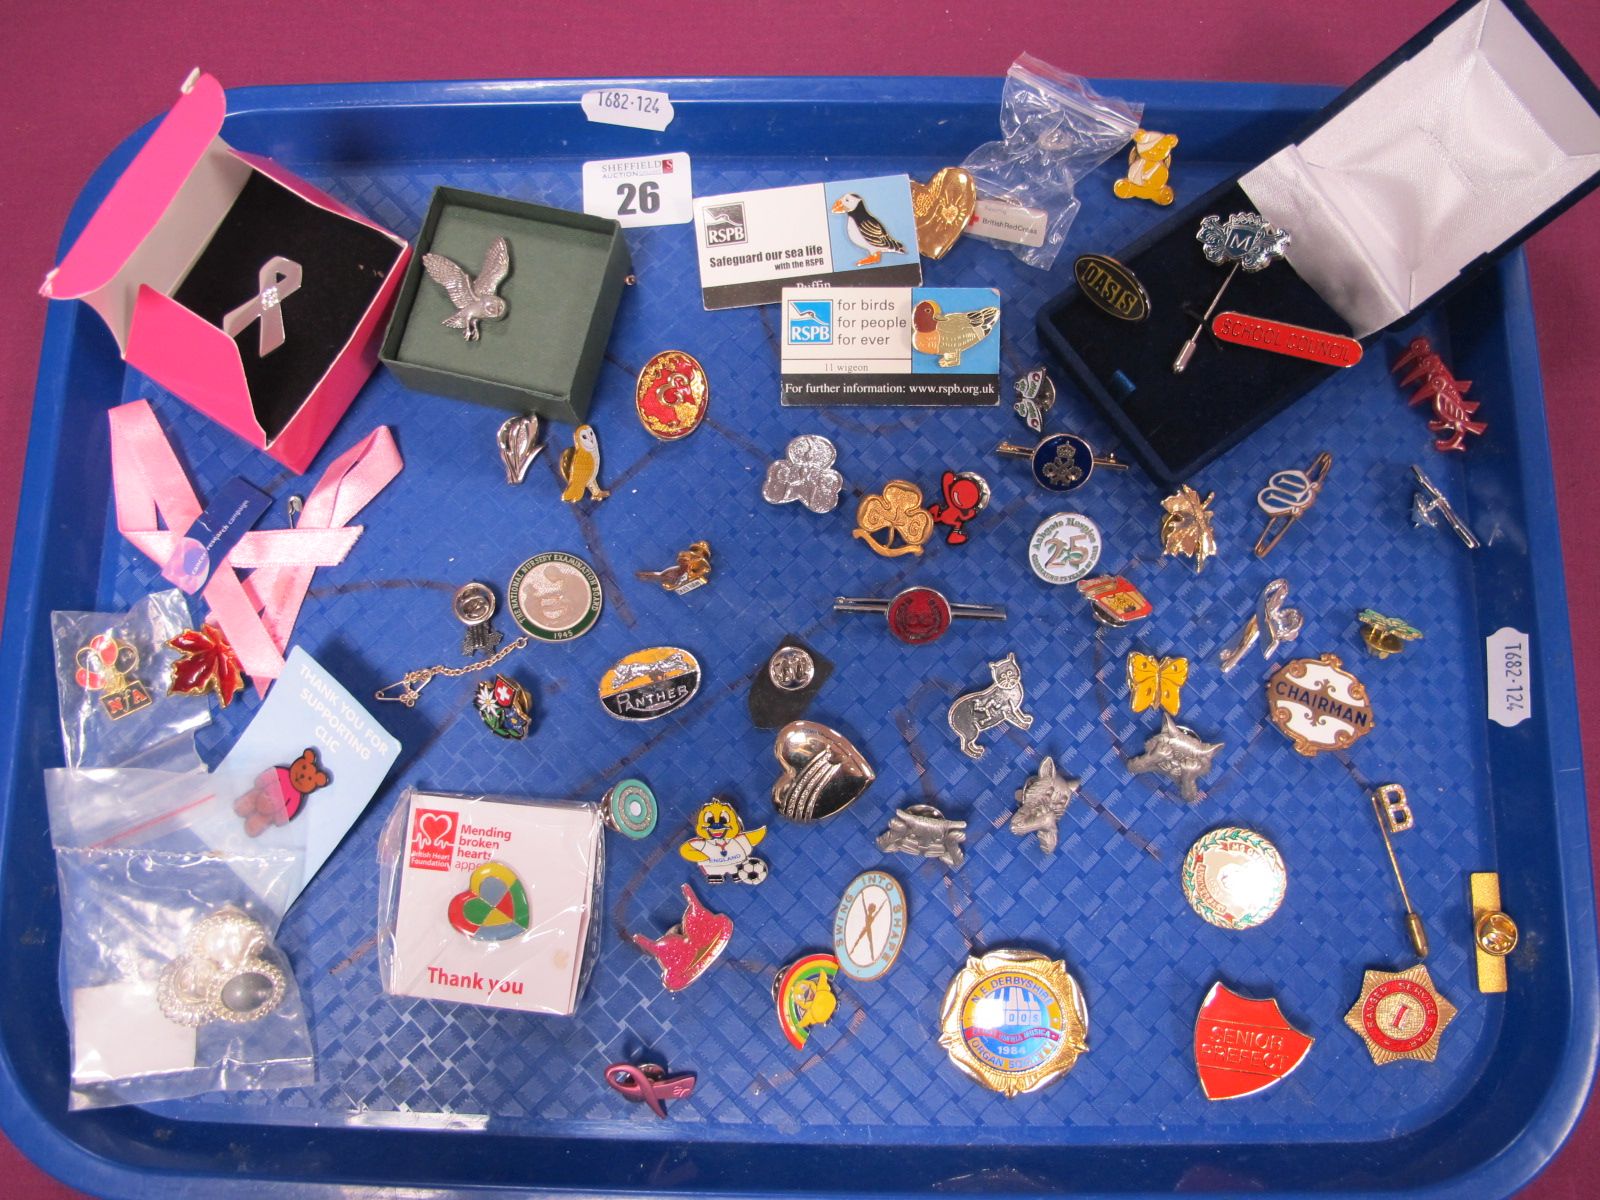 Enamel and Other Pins/Badges, including Girl Guides, RSPB, an "MG Owners Club 1973 - 1983